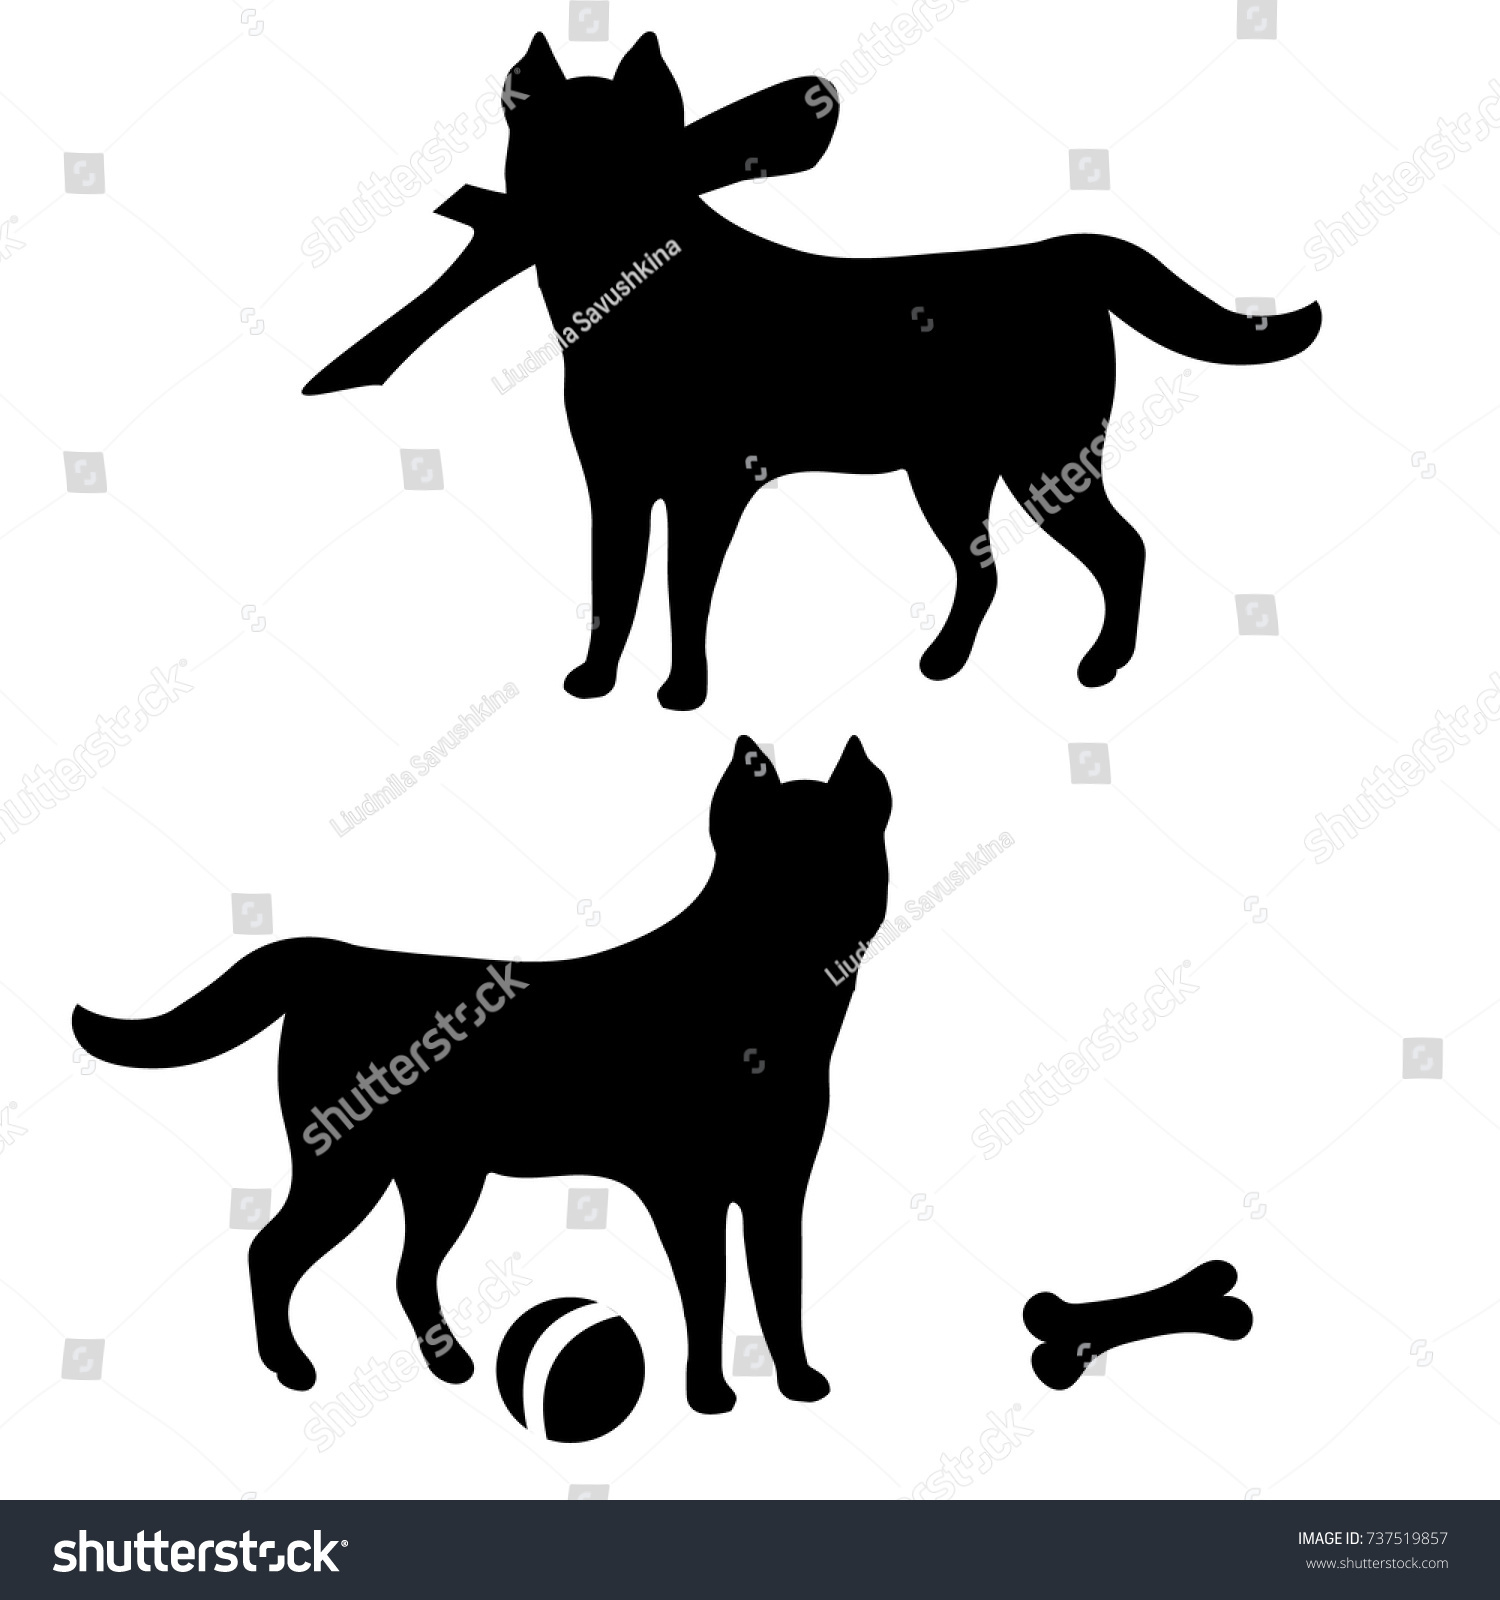 Dogs Playing Ball Dog Holds Stick Stock Vector 737519857 - Shutterstock